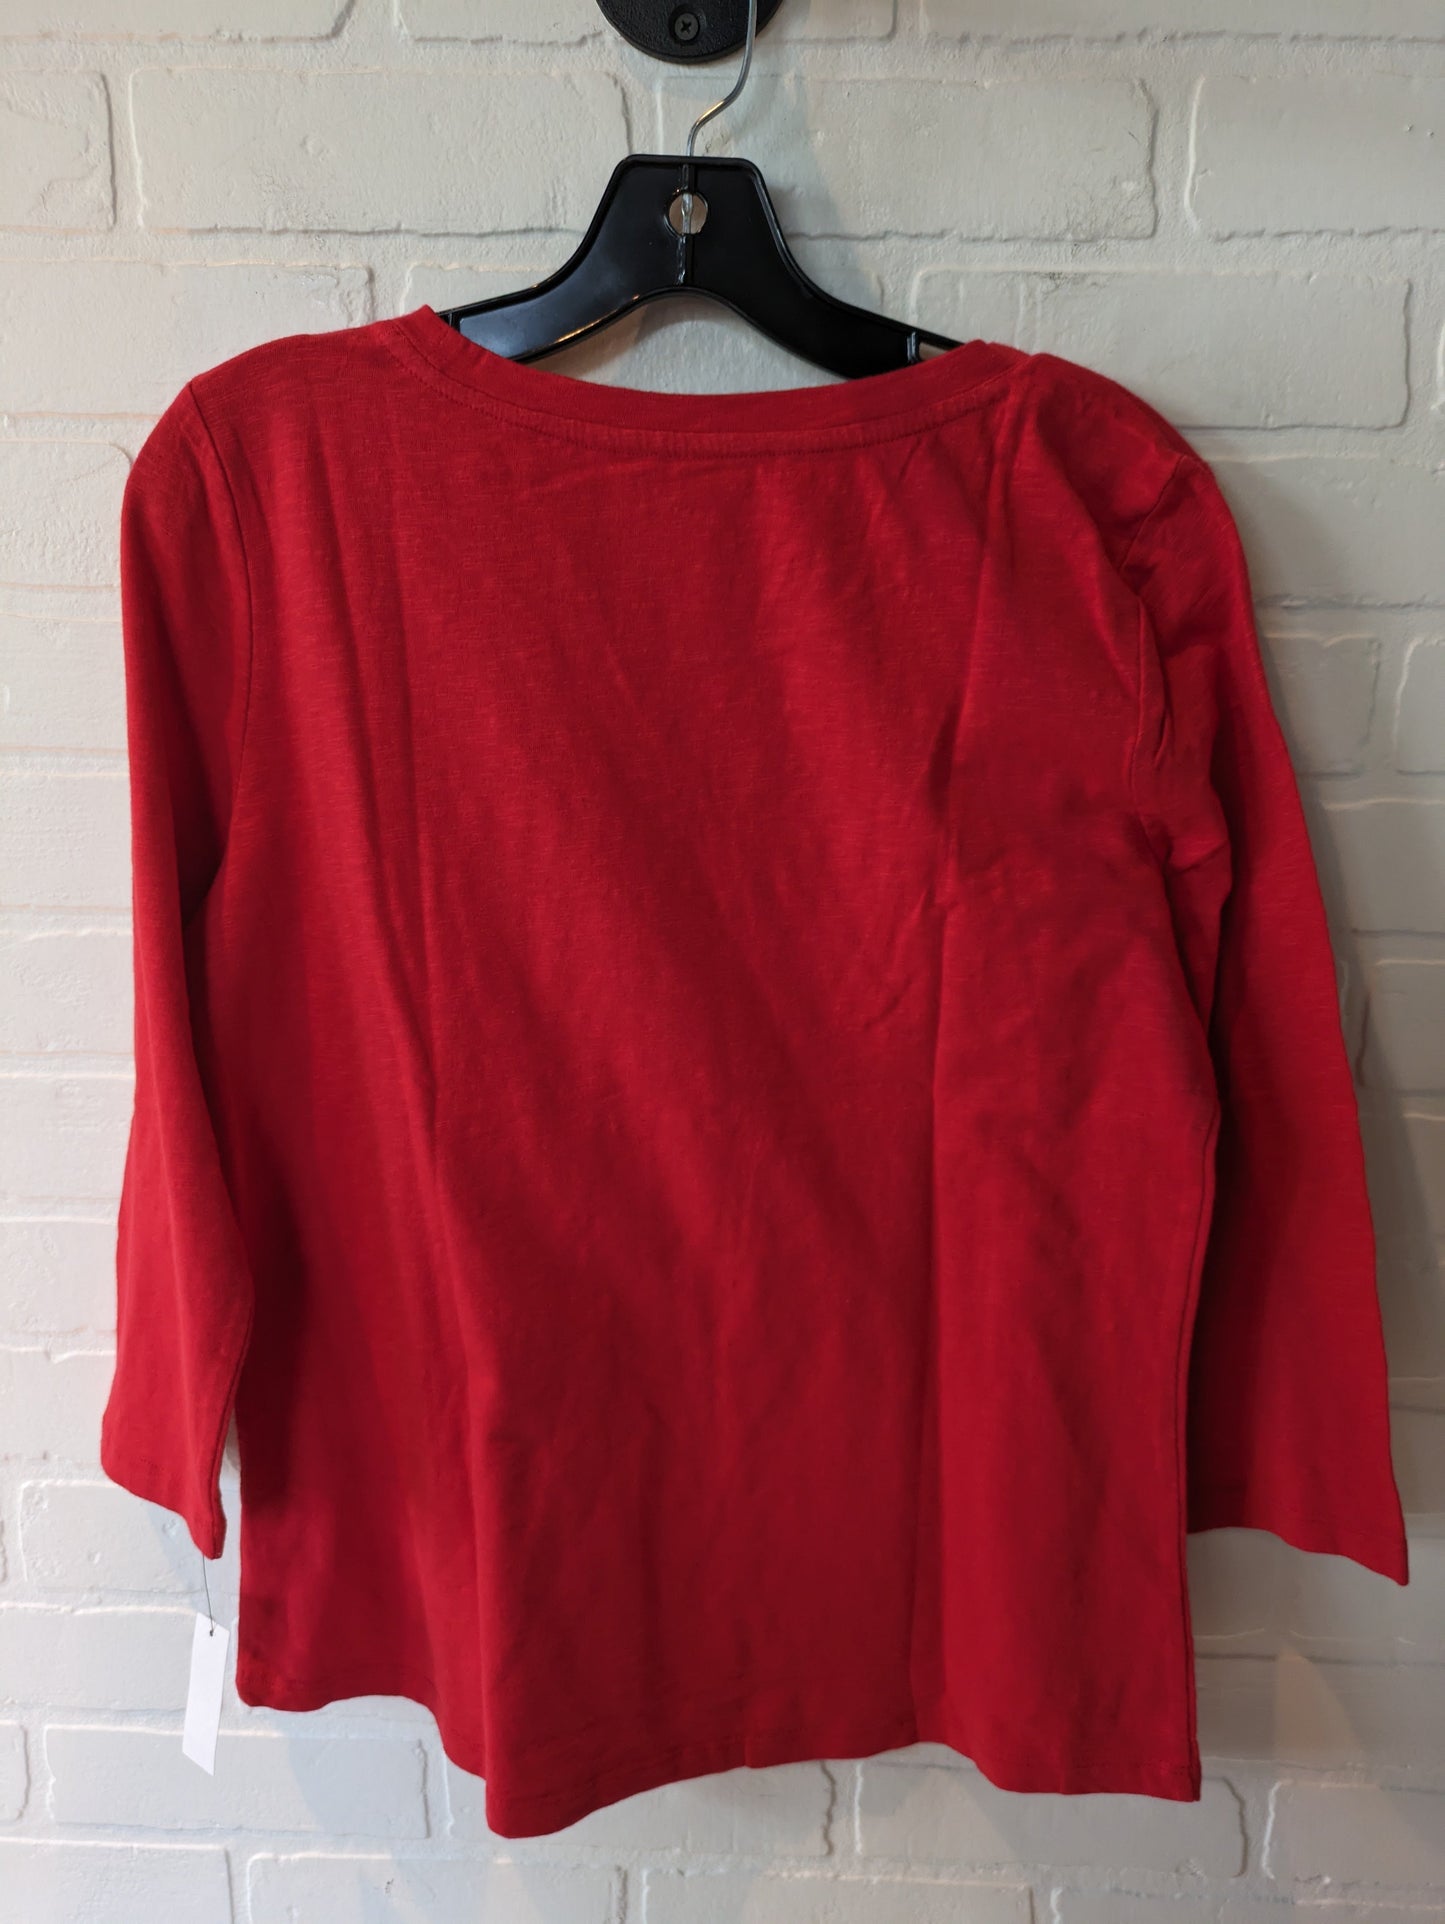 Red Top 3/4 Sleeve Talbots, Size M